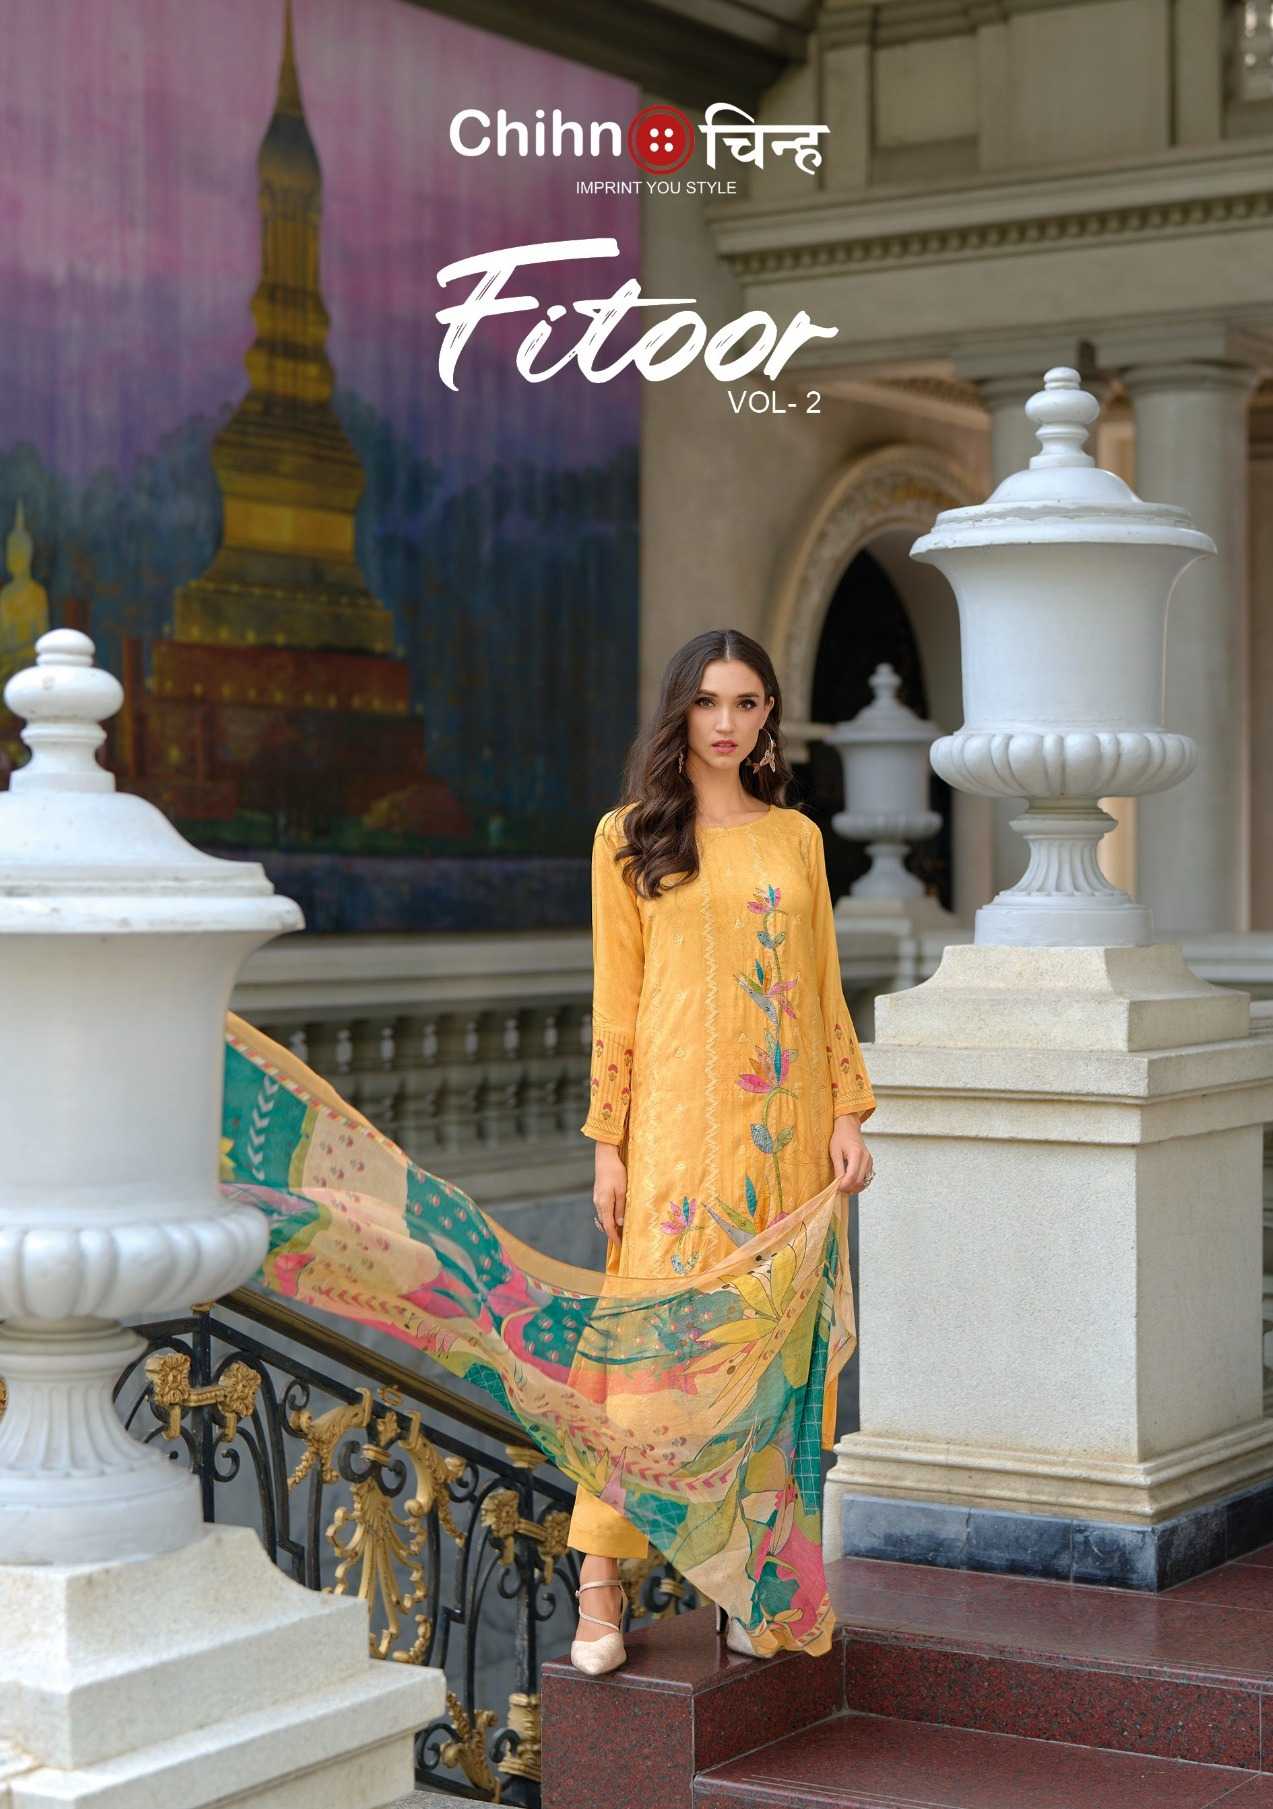 chihn fitoor vol 2 occasion wear embroidery digital print unstitch salwar suit 